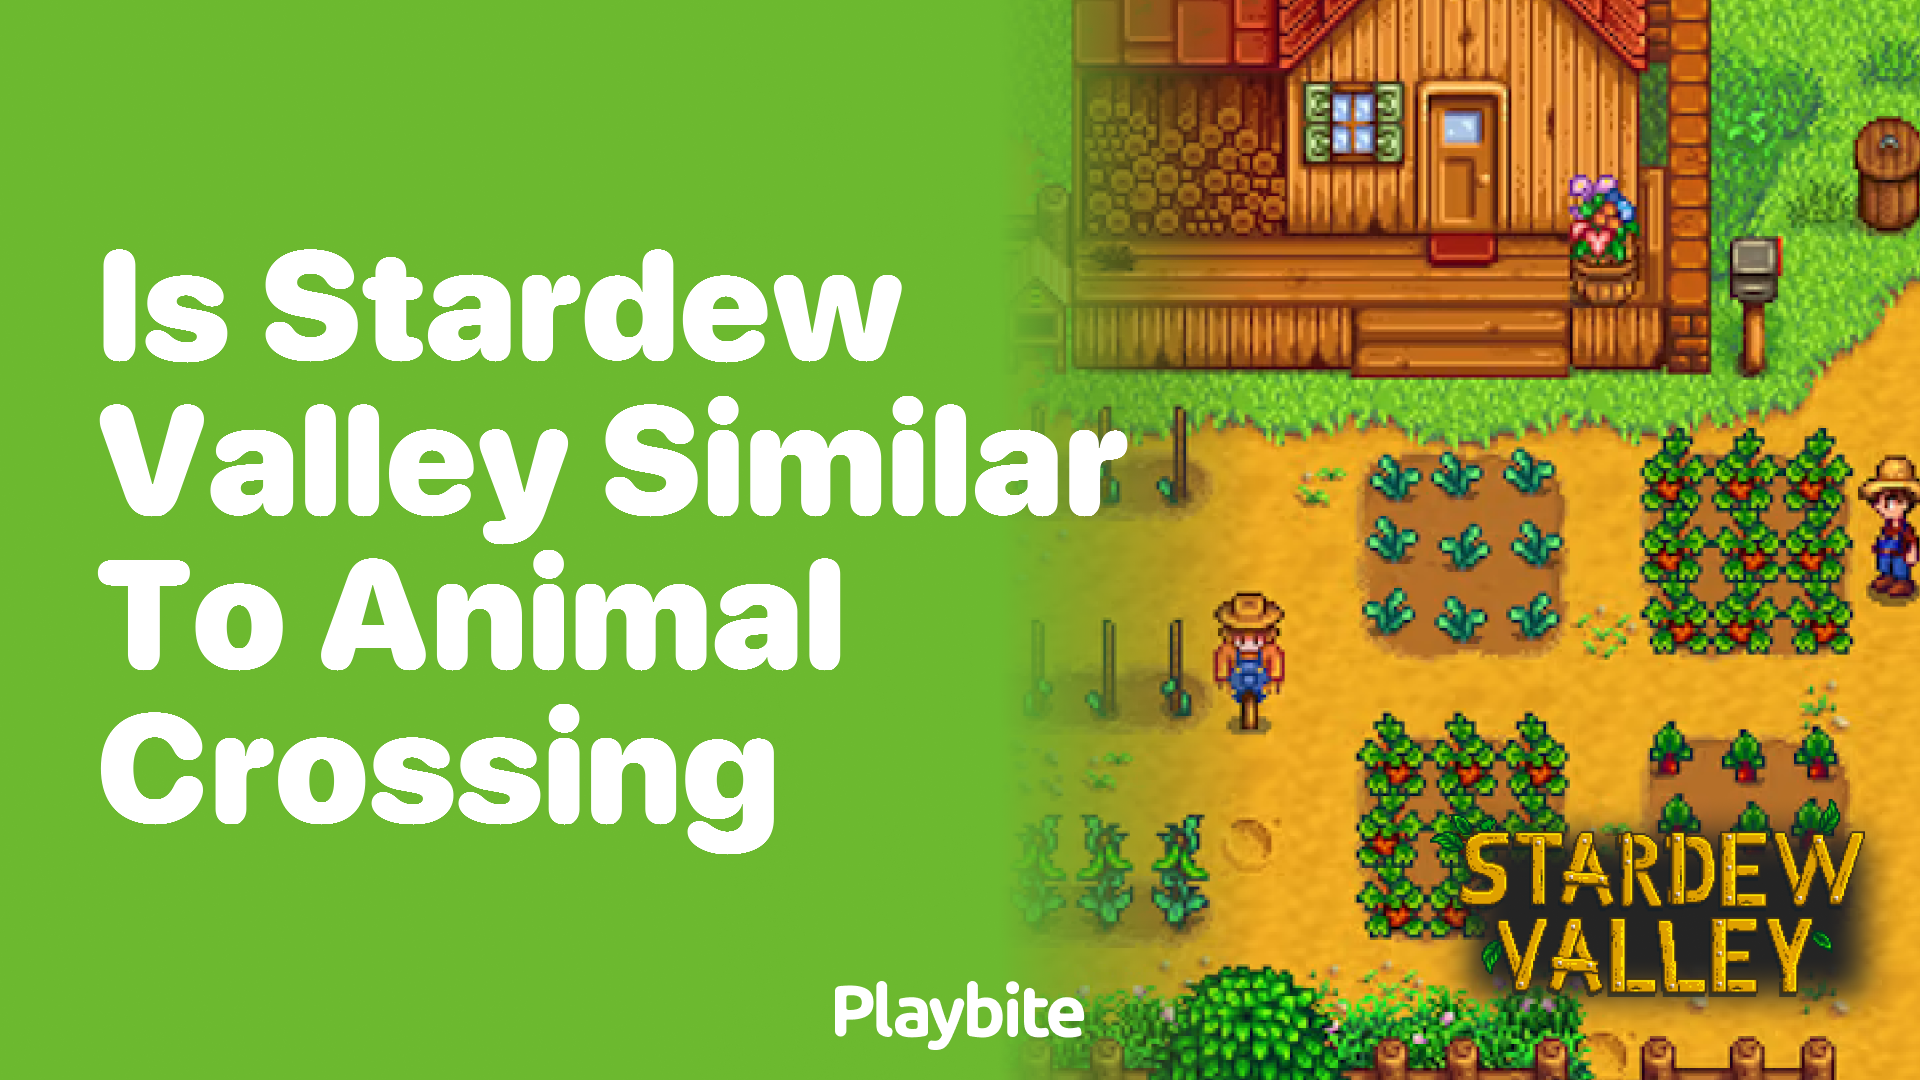 Is Stardew Valley similar to Animal Crossing?